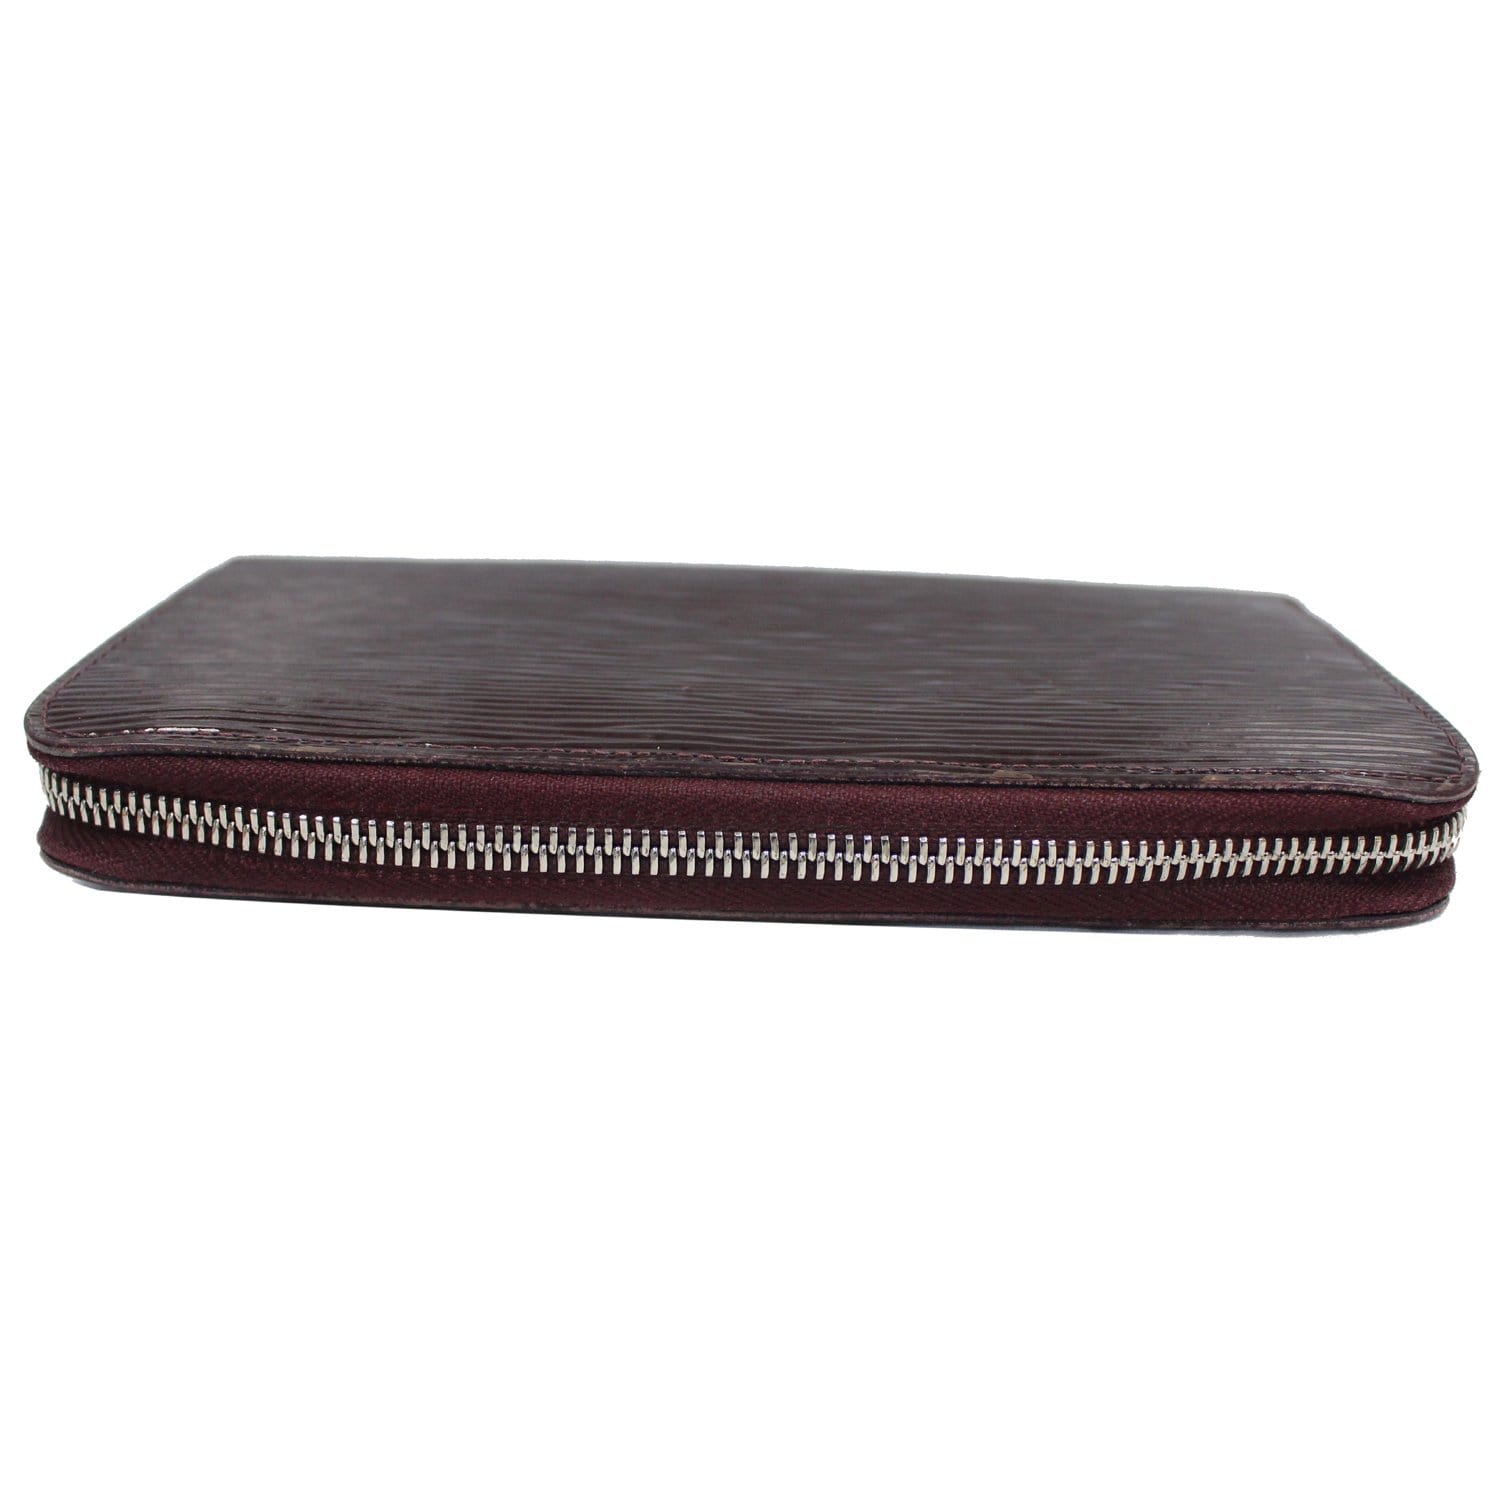 Zippy leather wallet Louis Vuitton Burgundy in Leather - 36755883